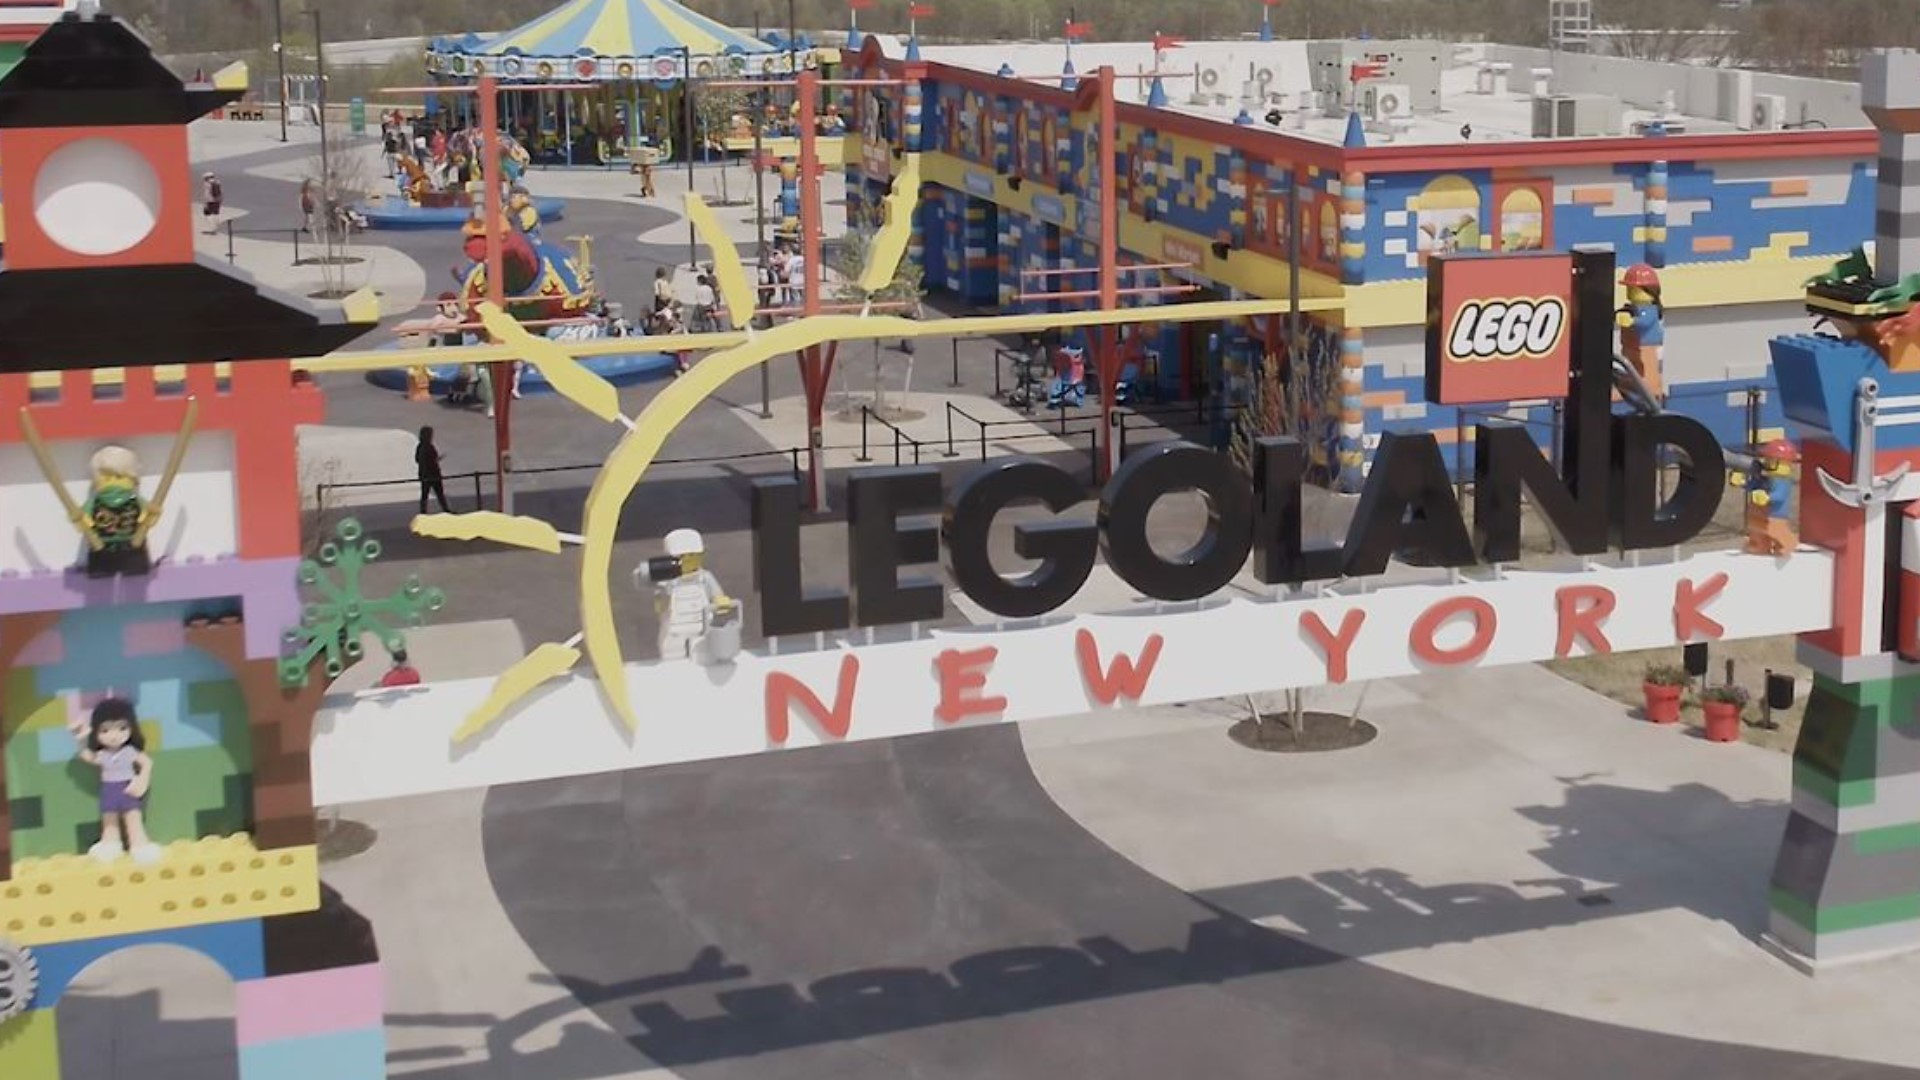 Calling all Lego fans! A new theme park that officially opened this month could be your ticket to fun that you can explore all in a day's drive from the 570.